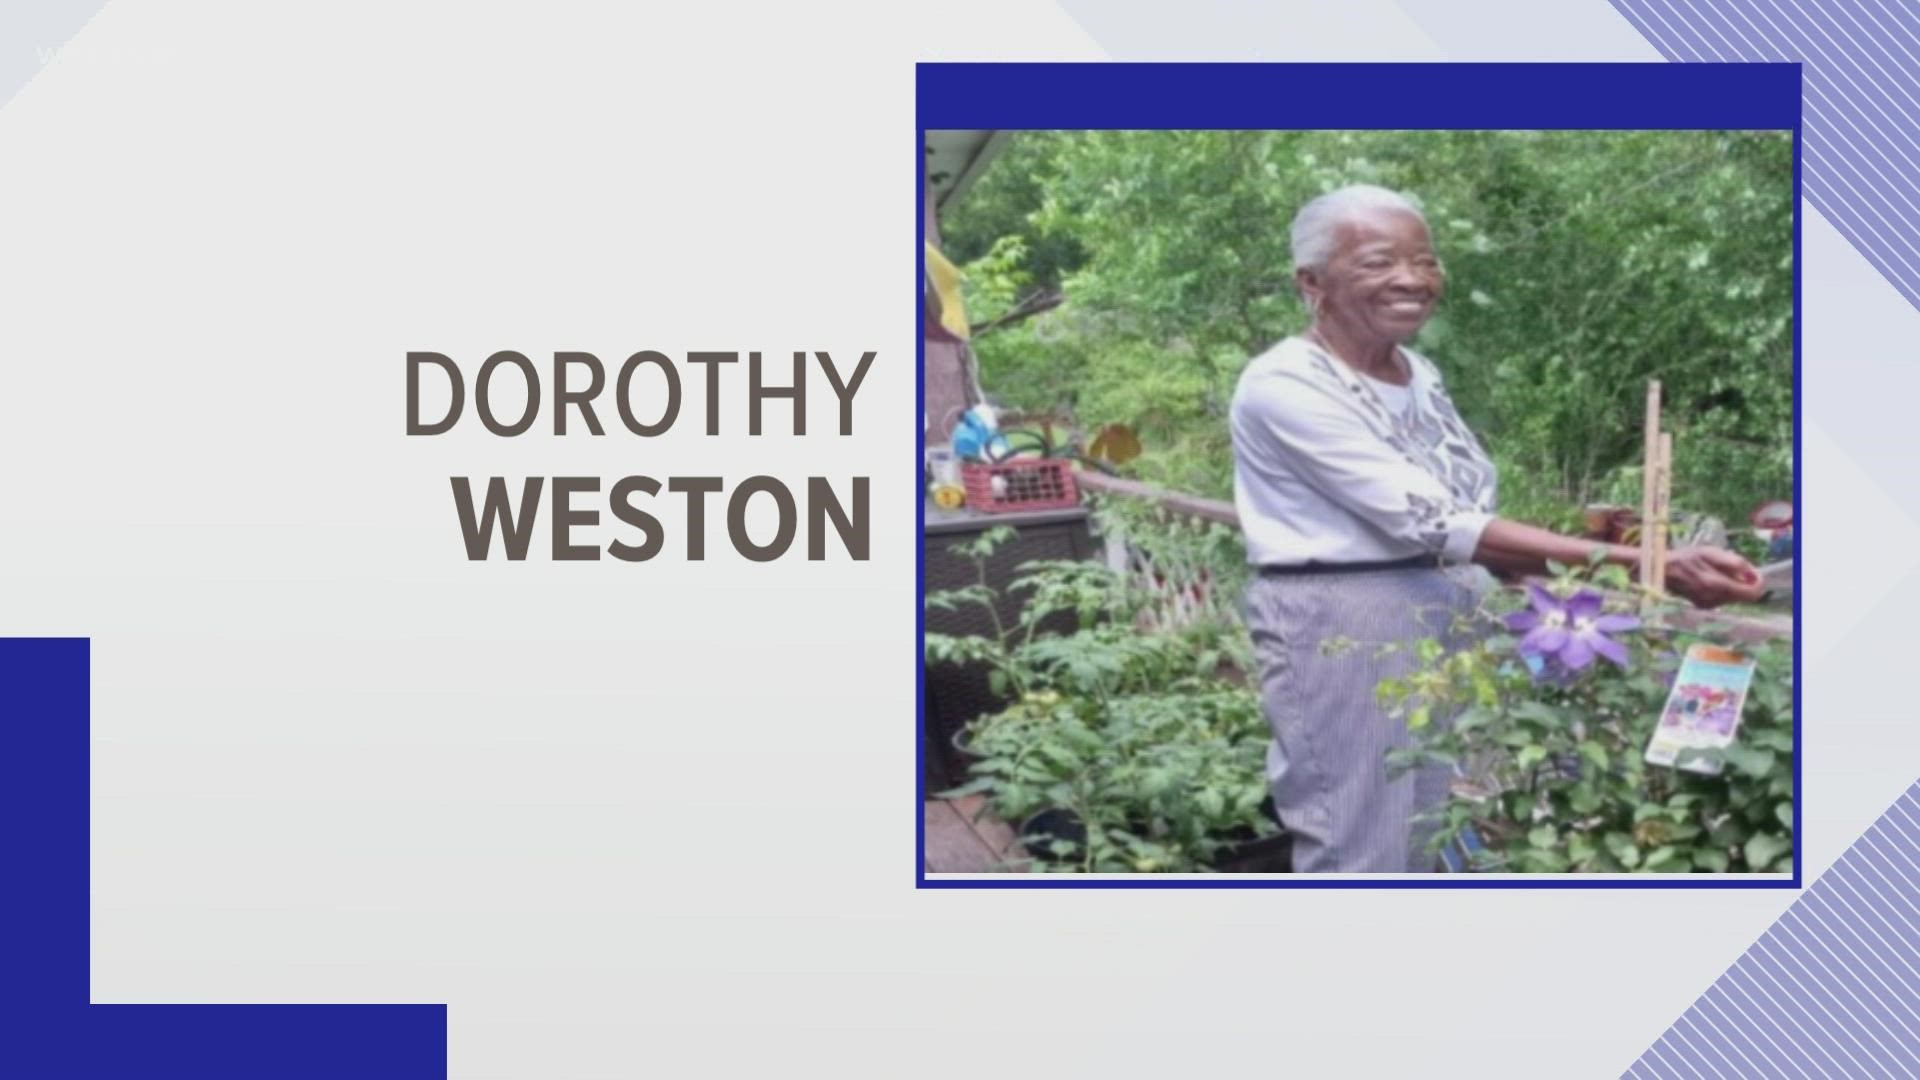 Police say 85-year-old Dorothy Weston was last seen around 5 p.m. Thursday at the Harbison Walmart.